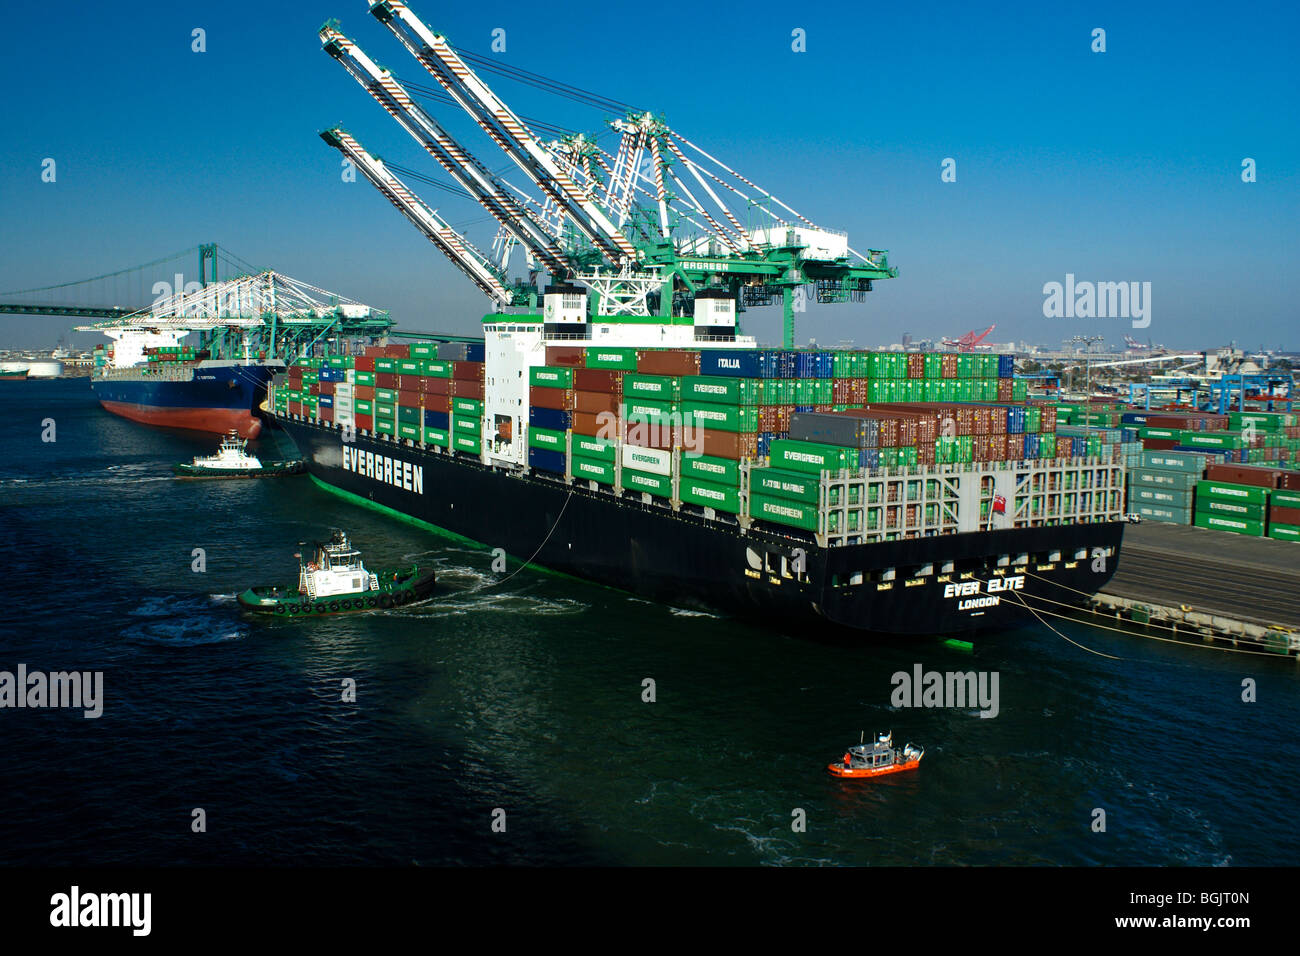 Container ships at dock with tugboats, Port of Los Angeles, California Stock Photo